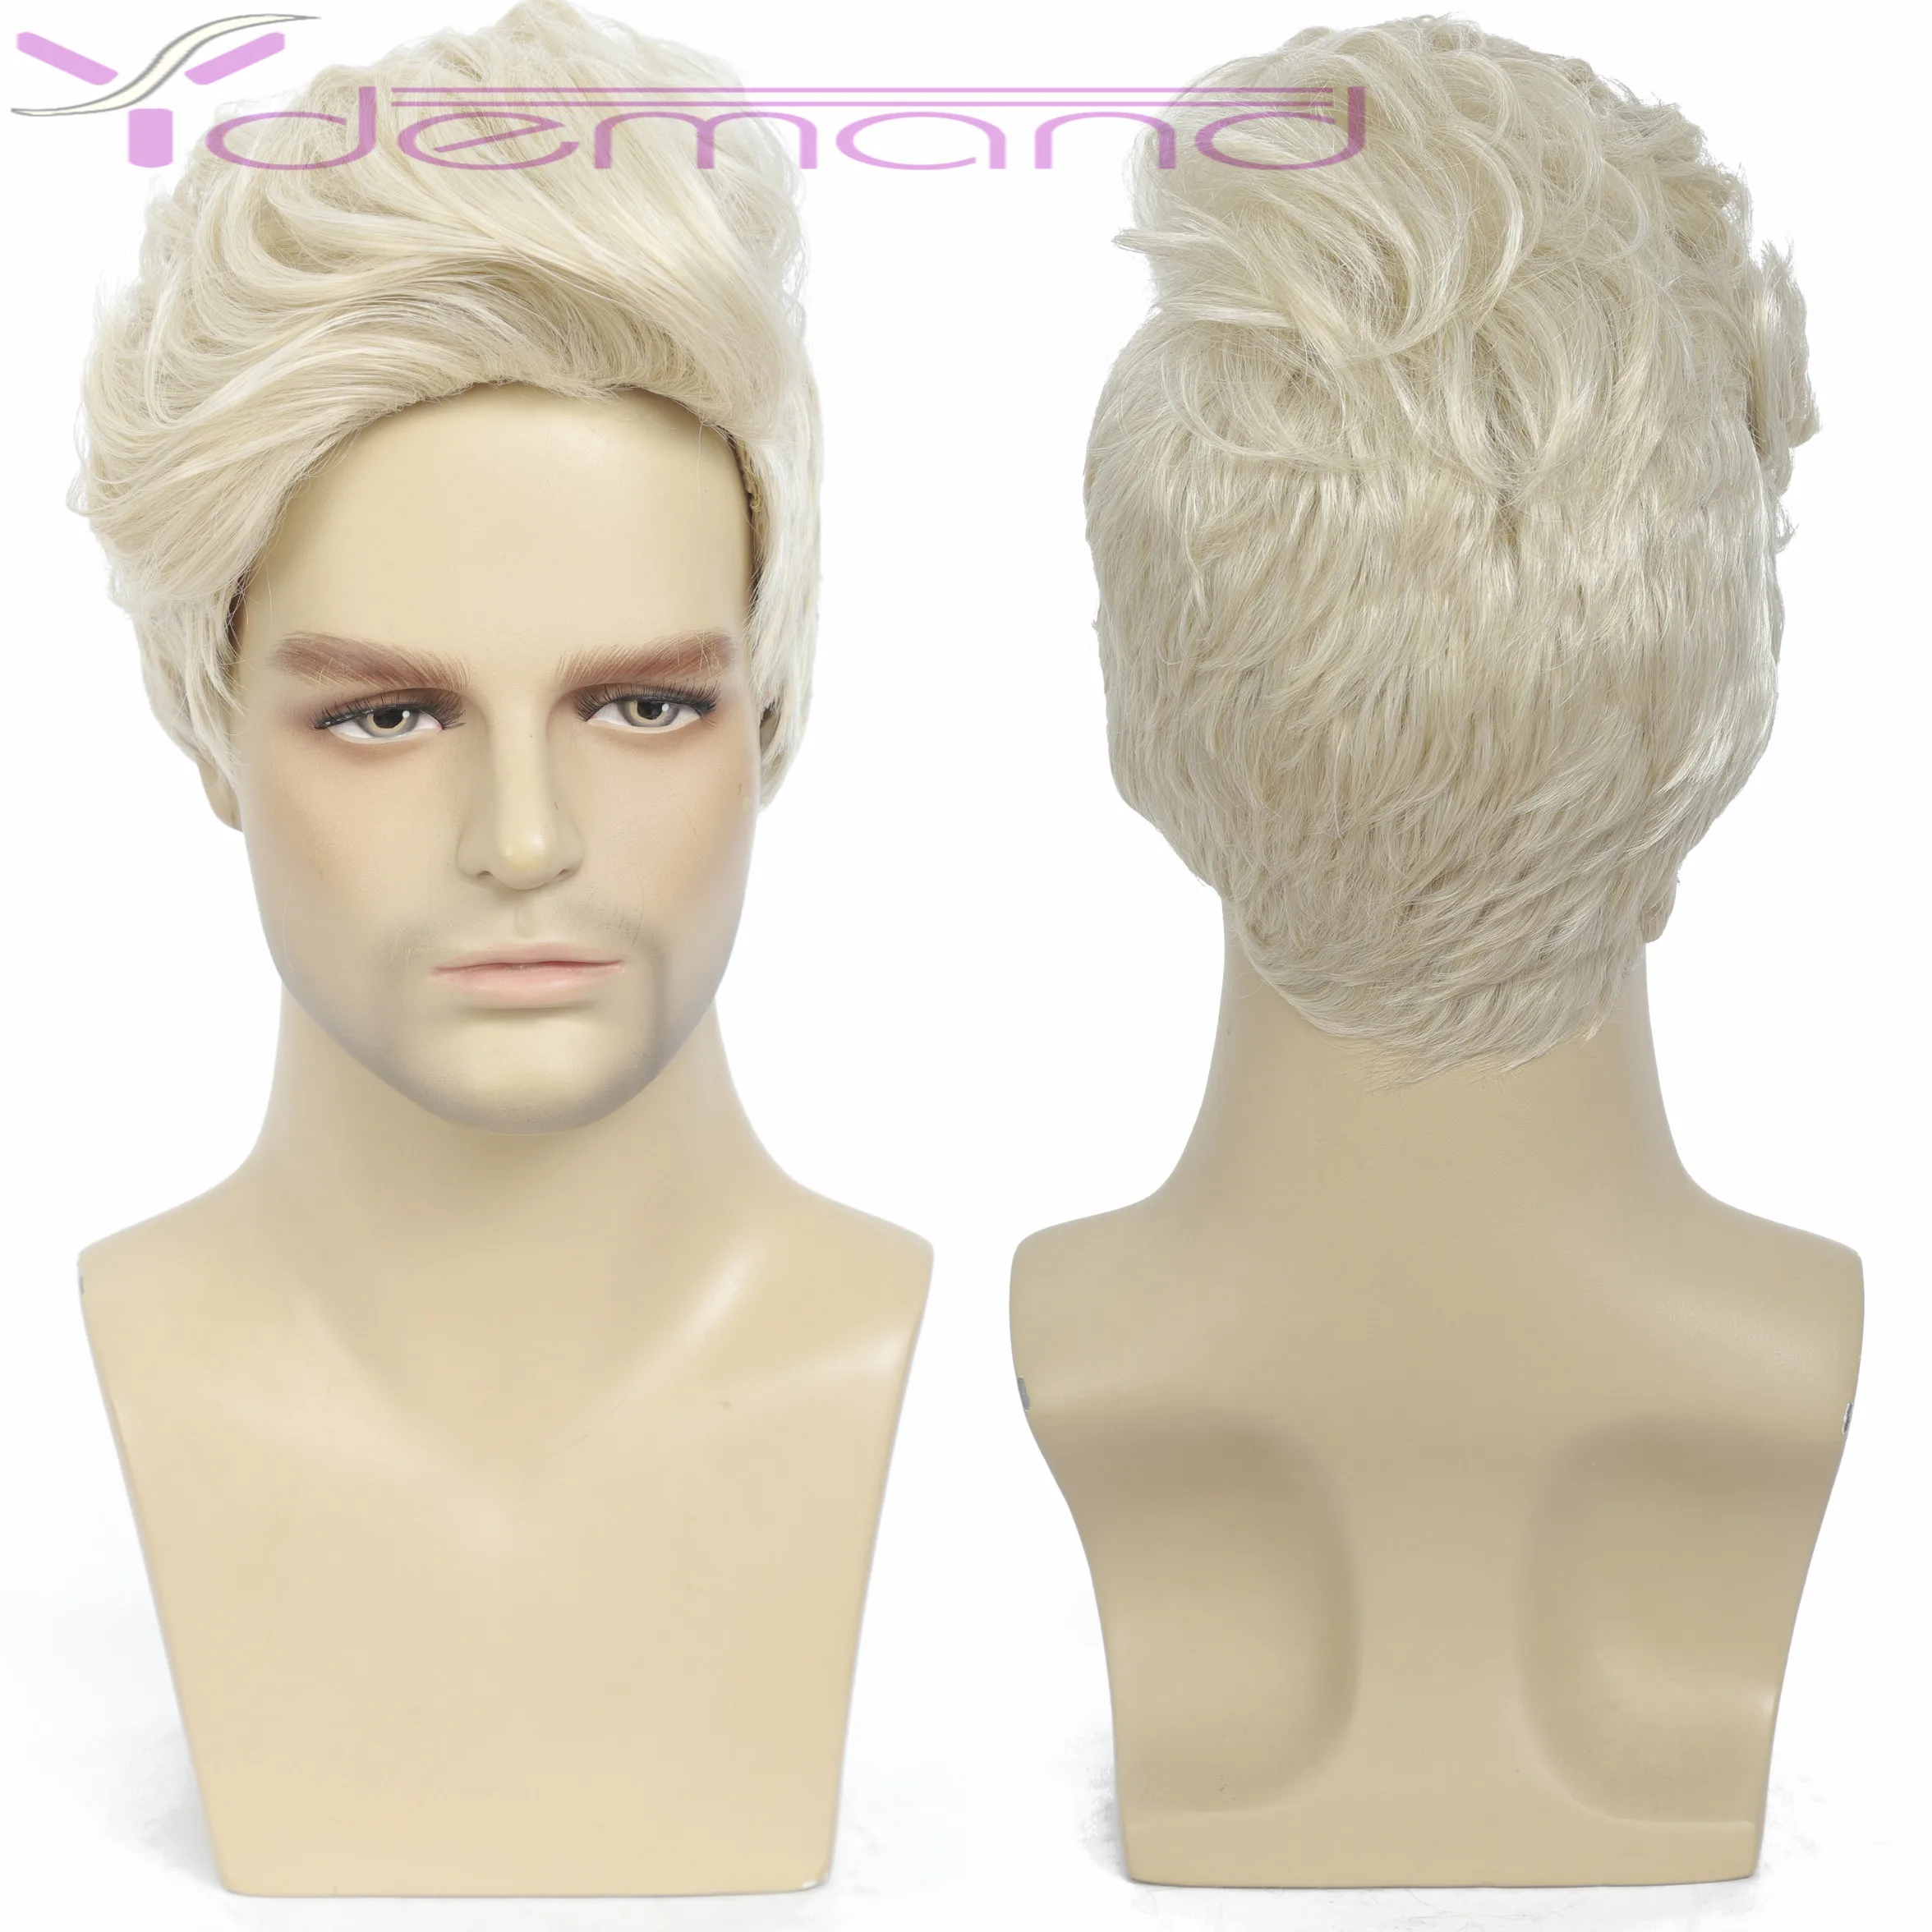 

Y Demand Men Youth Wig Short Blonde Synthetic Wave Full Wigs Fleeciness Realistic Natural Toupee Hairs